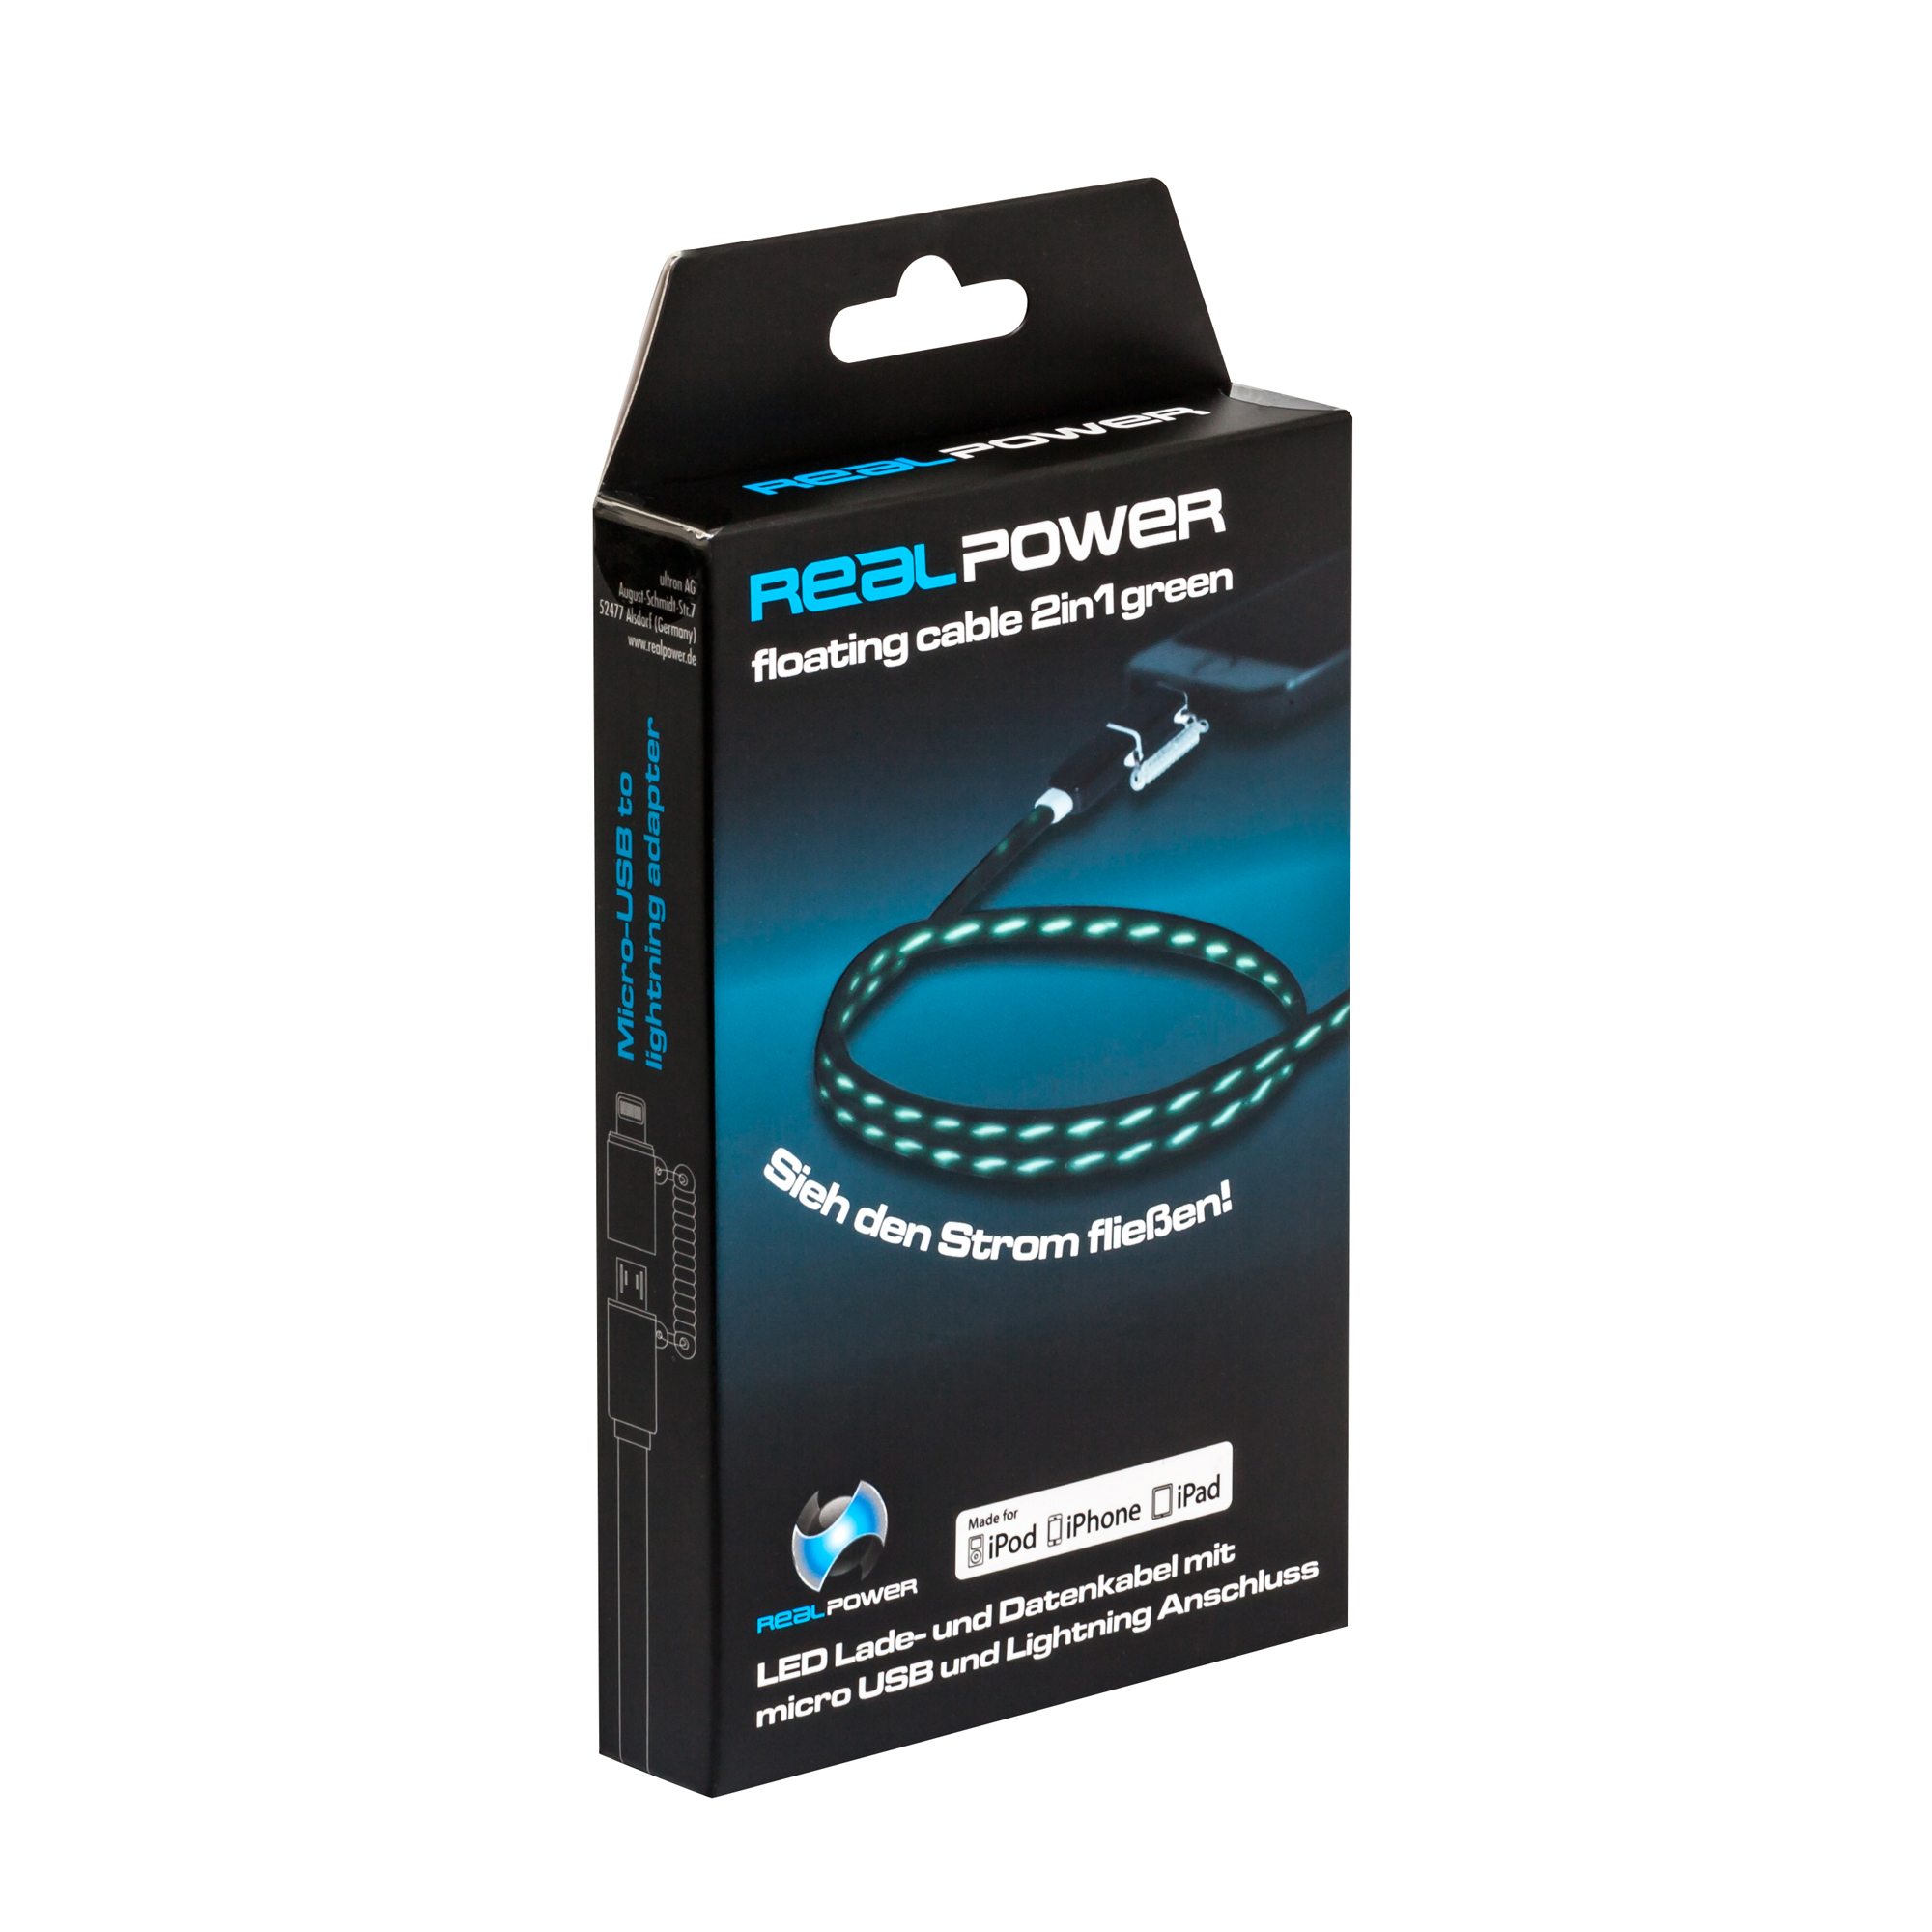 cable Schwarz/Grün REALPOWER 2in1, 2in1, Floating Kabel